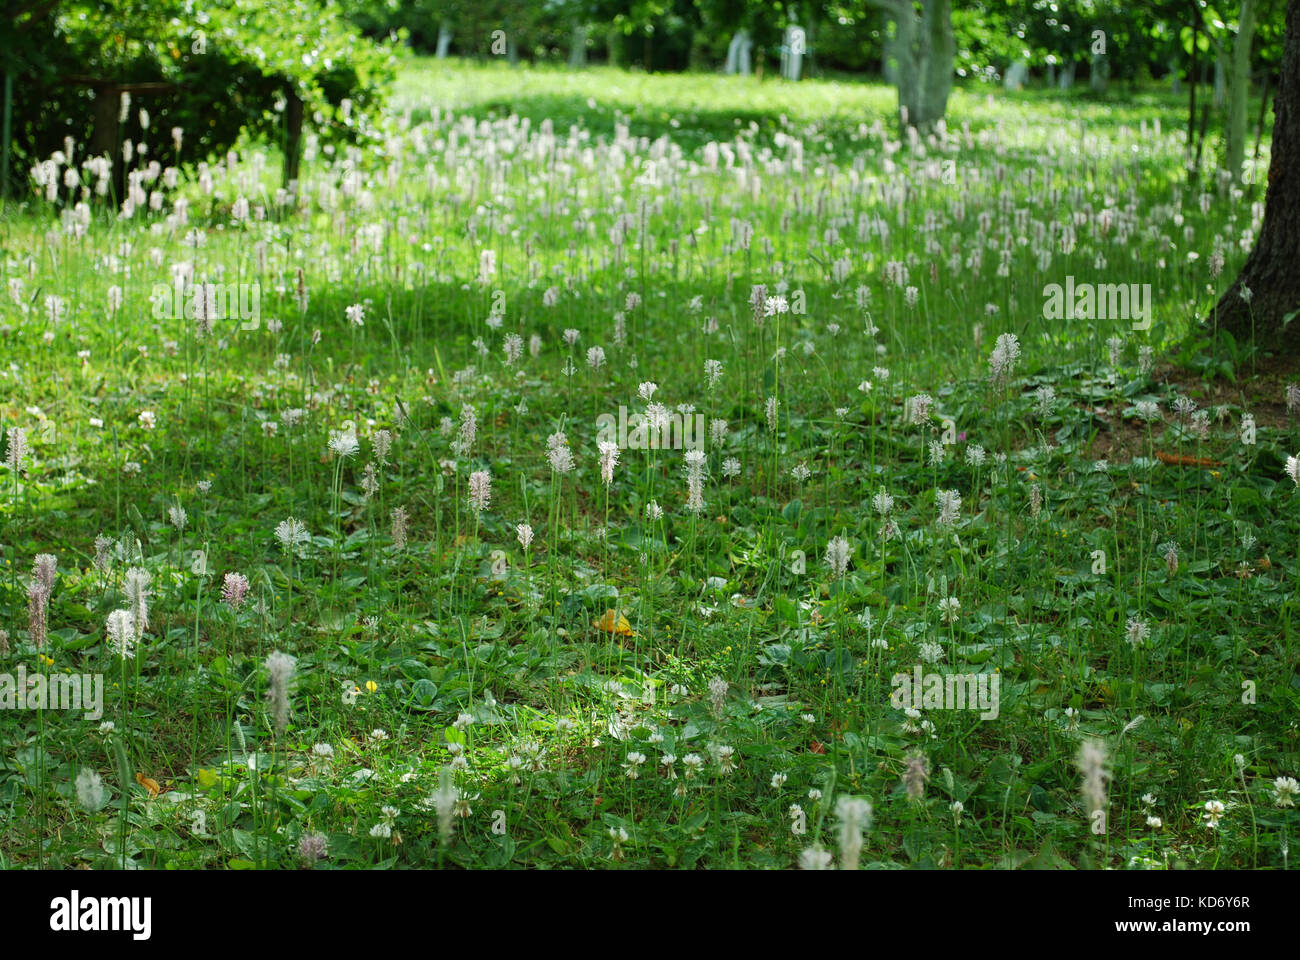 Meadow of Plantago major (broadleaf plantain, white man's foot, or greater plantain) white flowers. Stock Photo